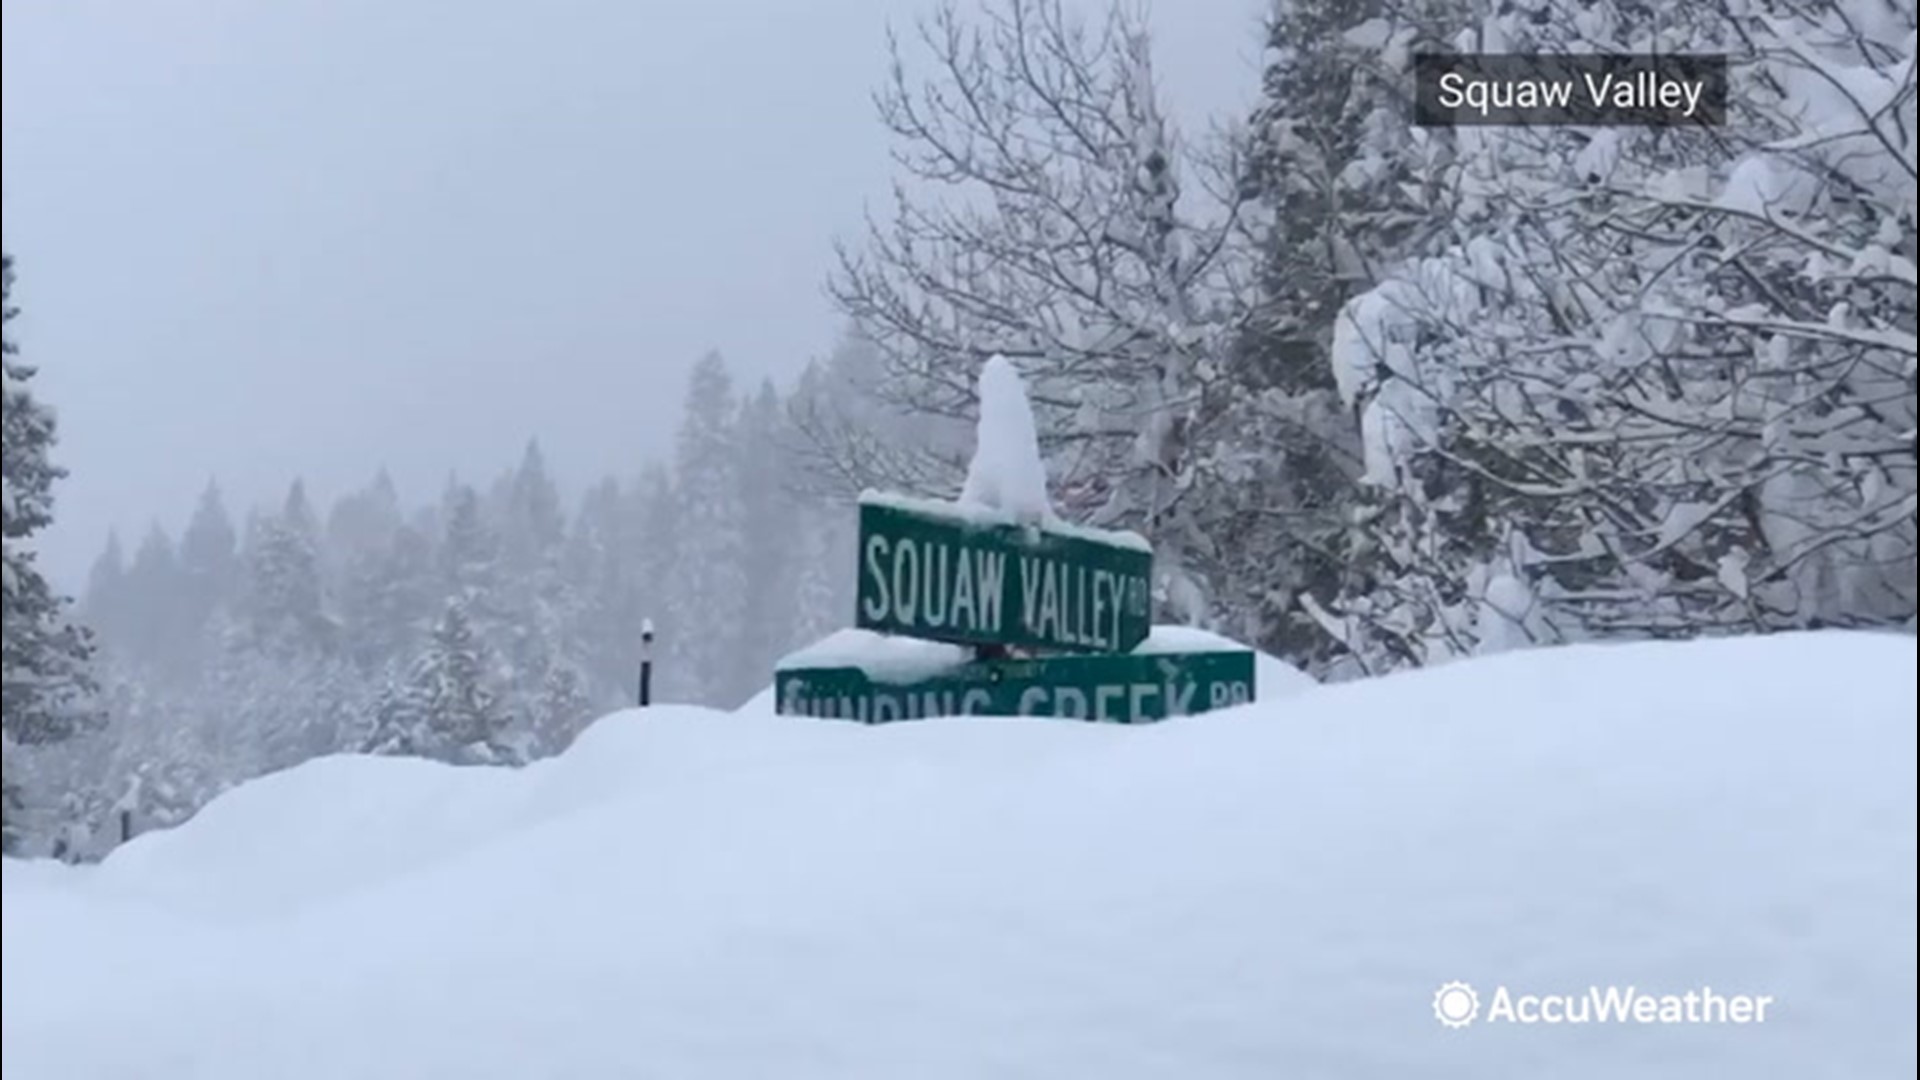 California's Squaw Valley and Alpine Meadows Ski Resorts were buried under snow on Jan. 28, after a storm dropped more than 4 feet of snow on the area.